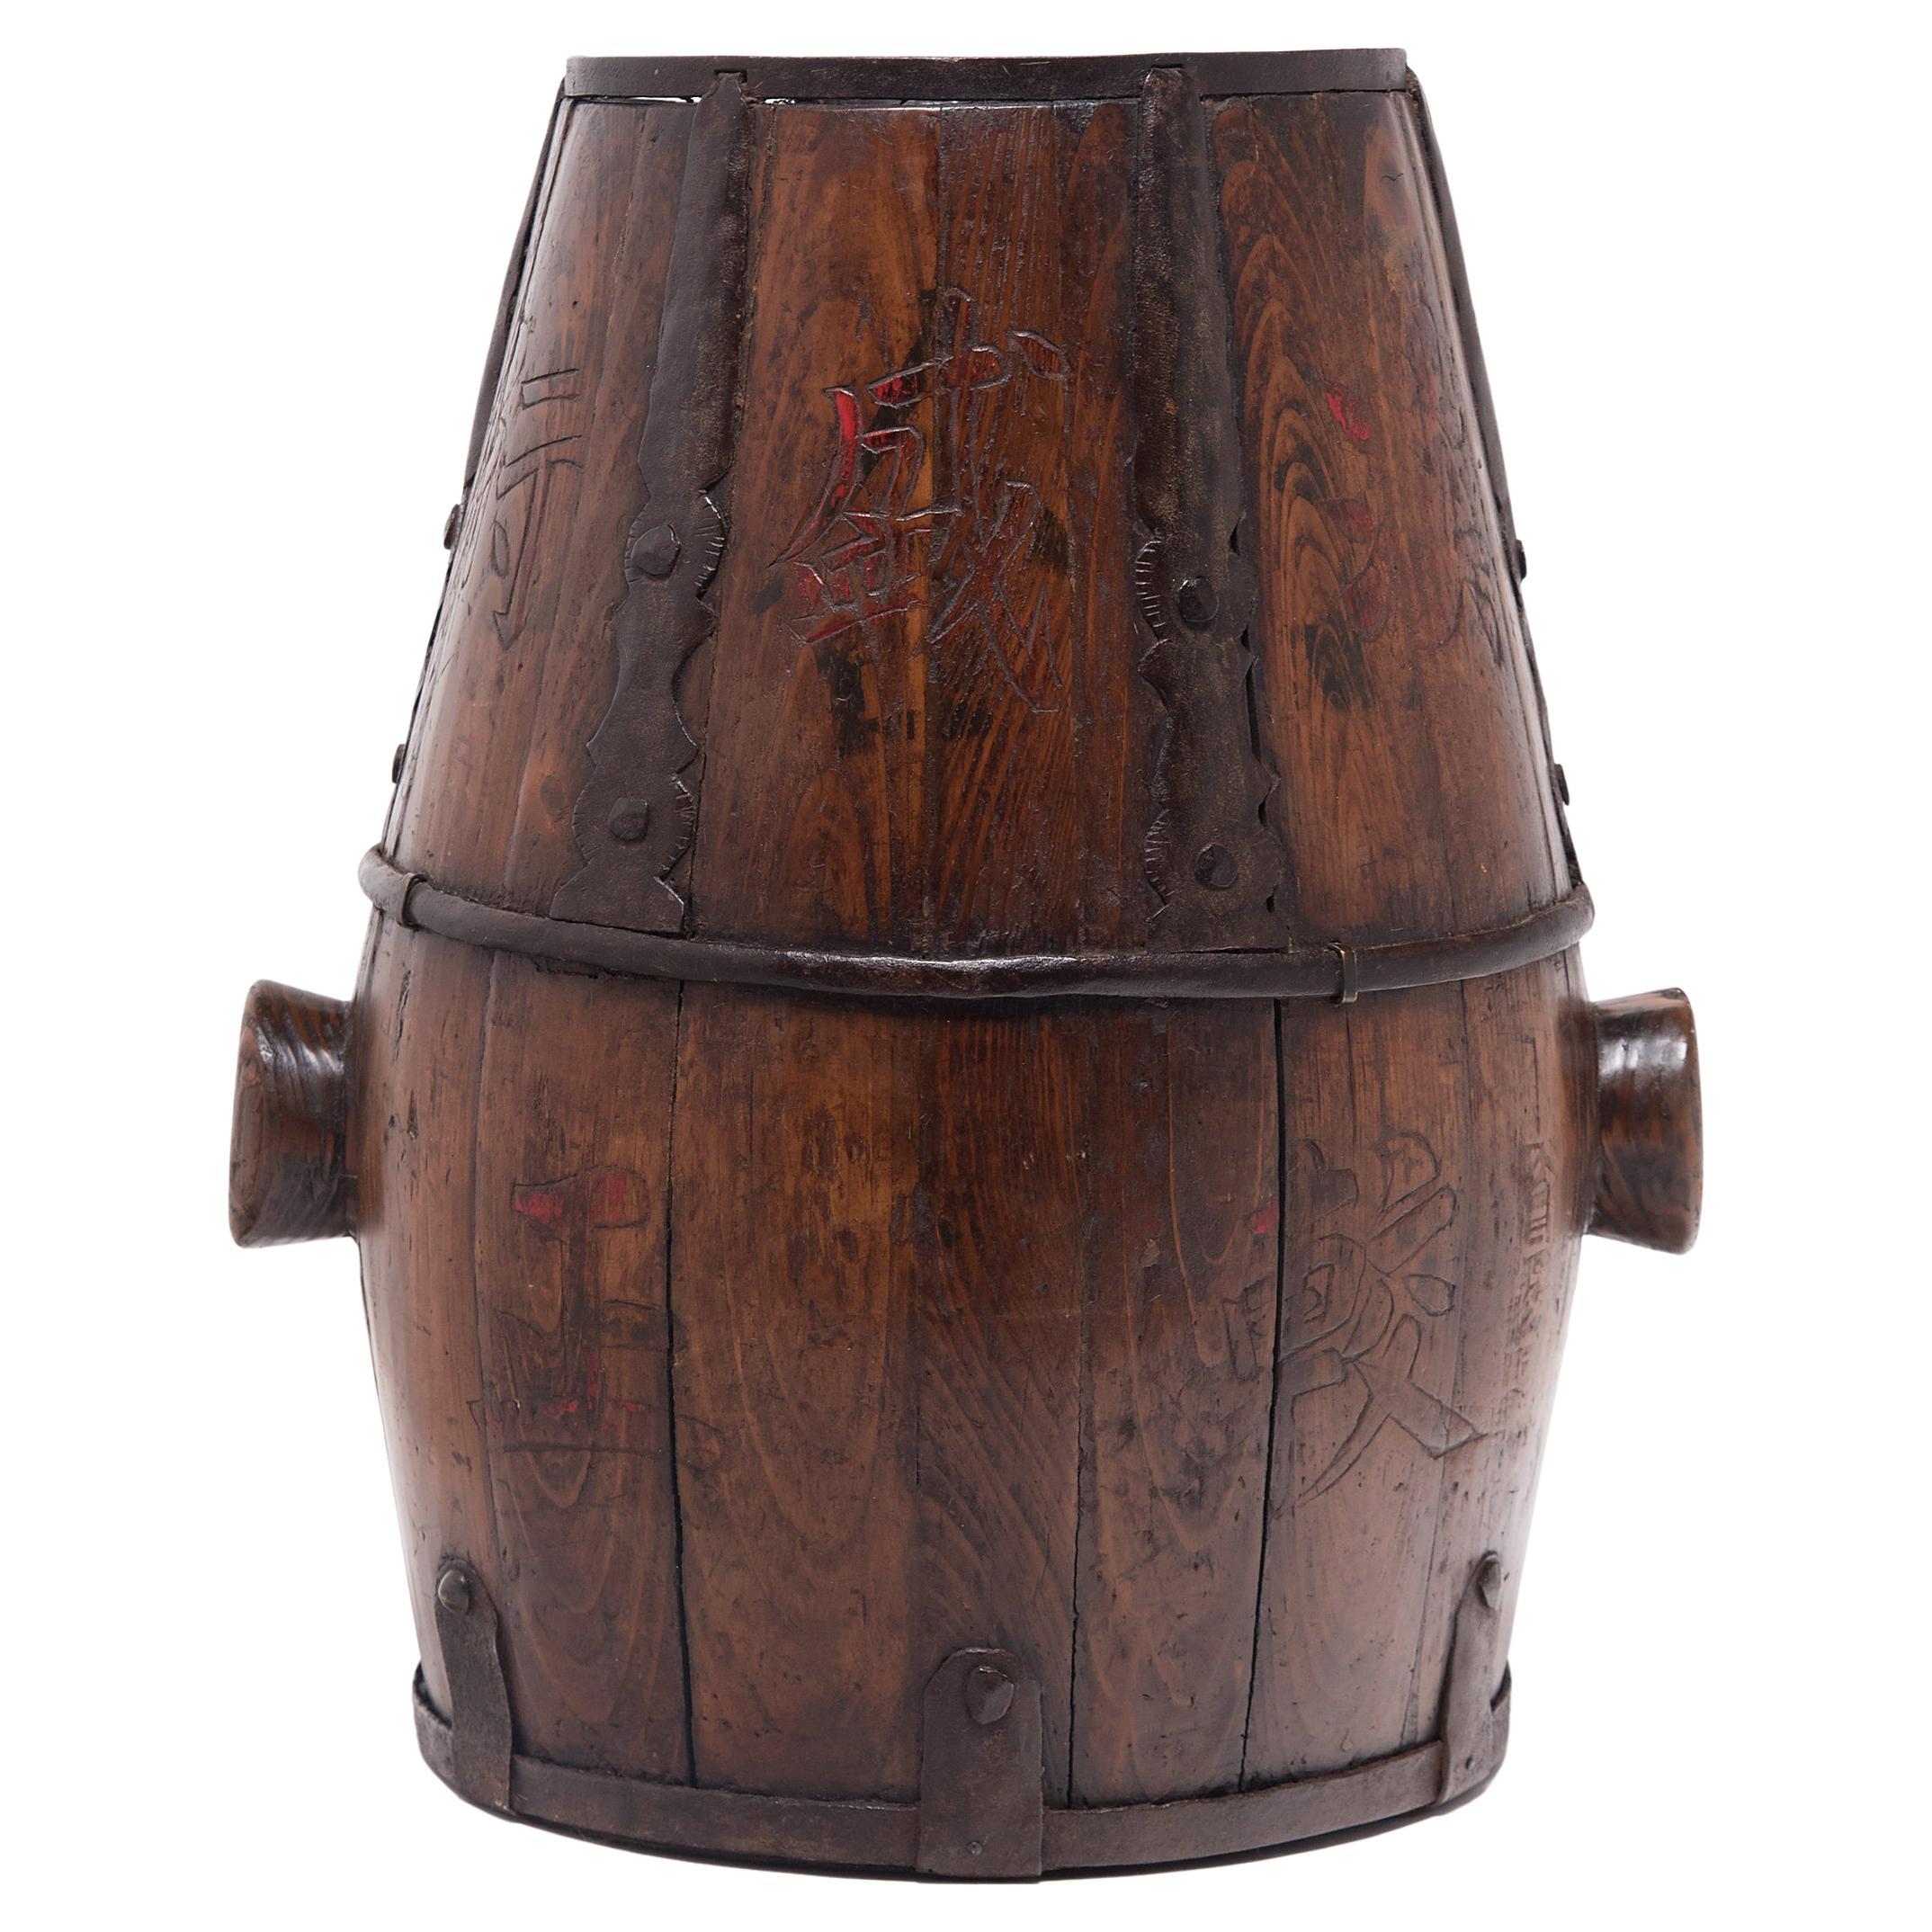 Chinese Barrel-Form Grain Container, c. 1900